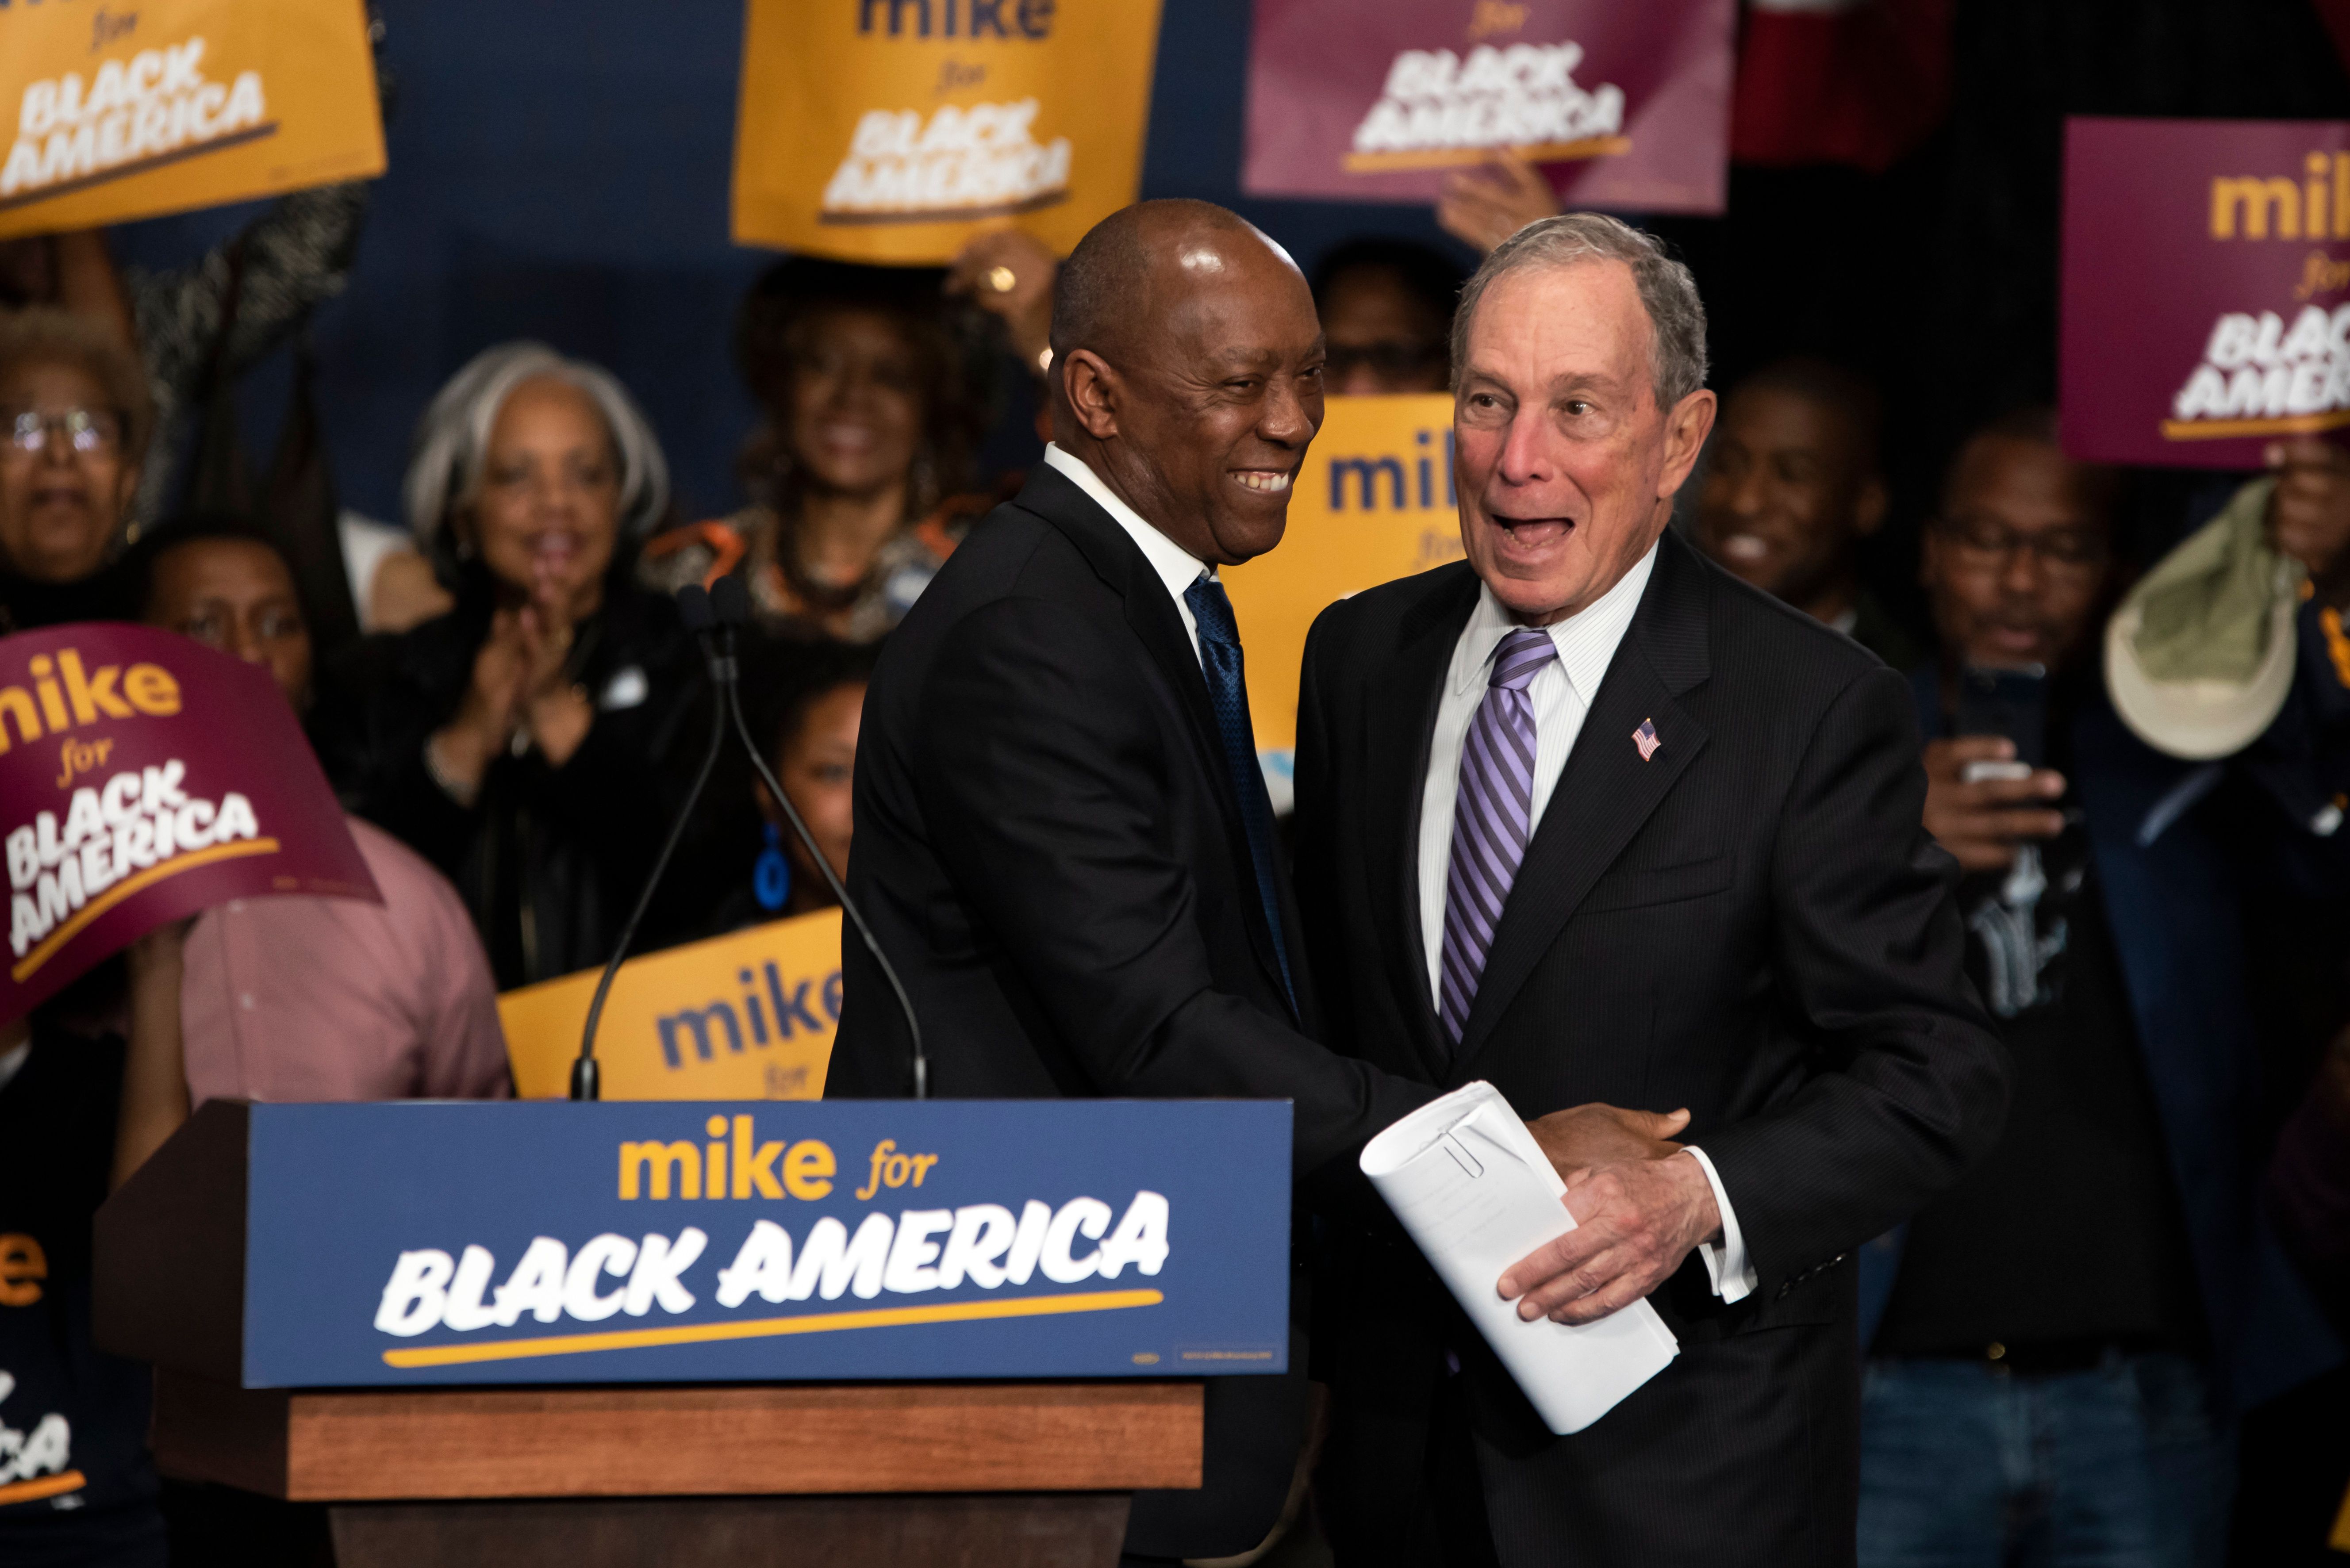 Democratic presidential hopeful Mike Bloomberg (R) arrives to speak at the "Mike for Black America Launch Celebration" at the Buffalo Soldier National Museum in Houston, Texas, on February 13, 2020. (MARK FELIX/AFP /AFP via Getty Images)